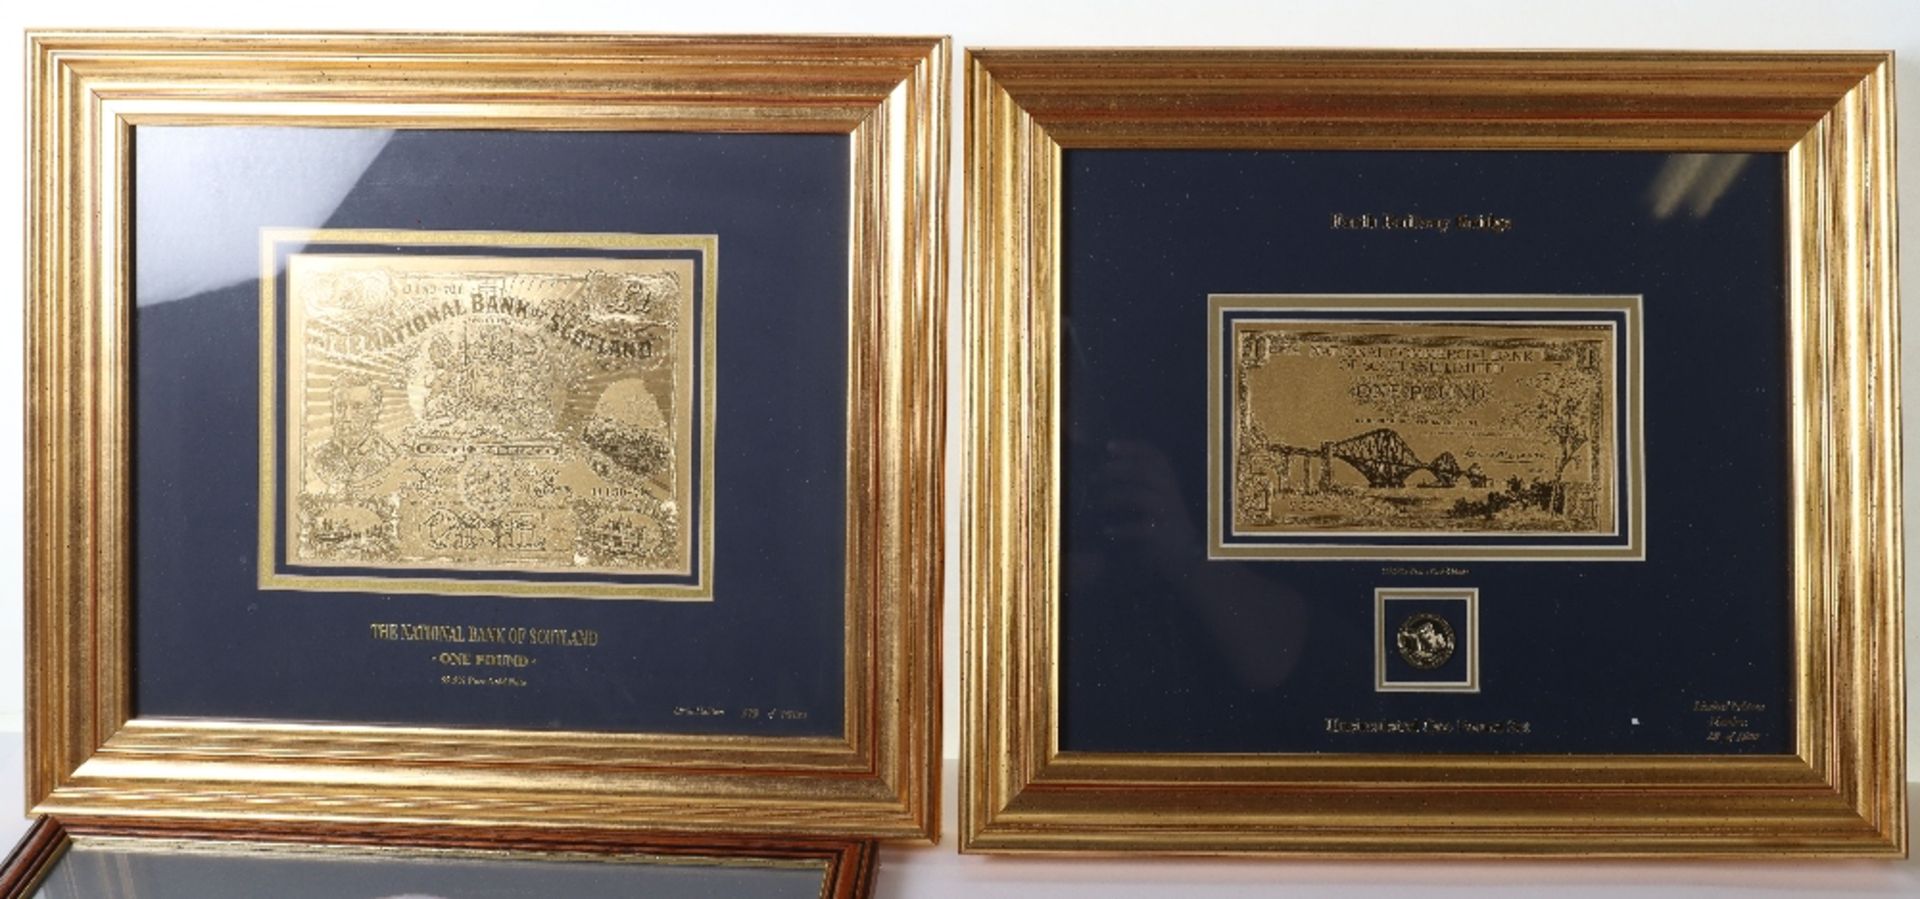 Framed coins and notes - Image 3 of 3